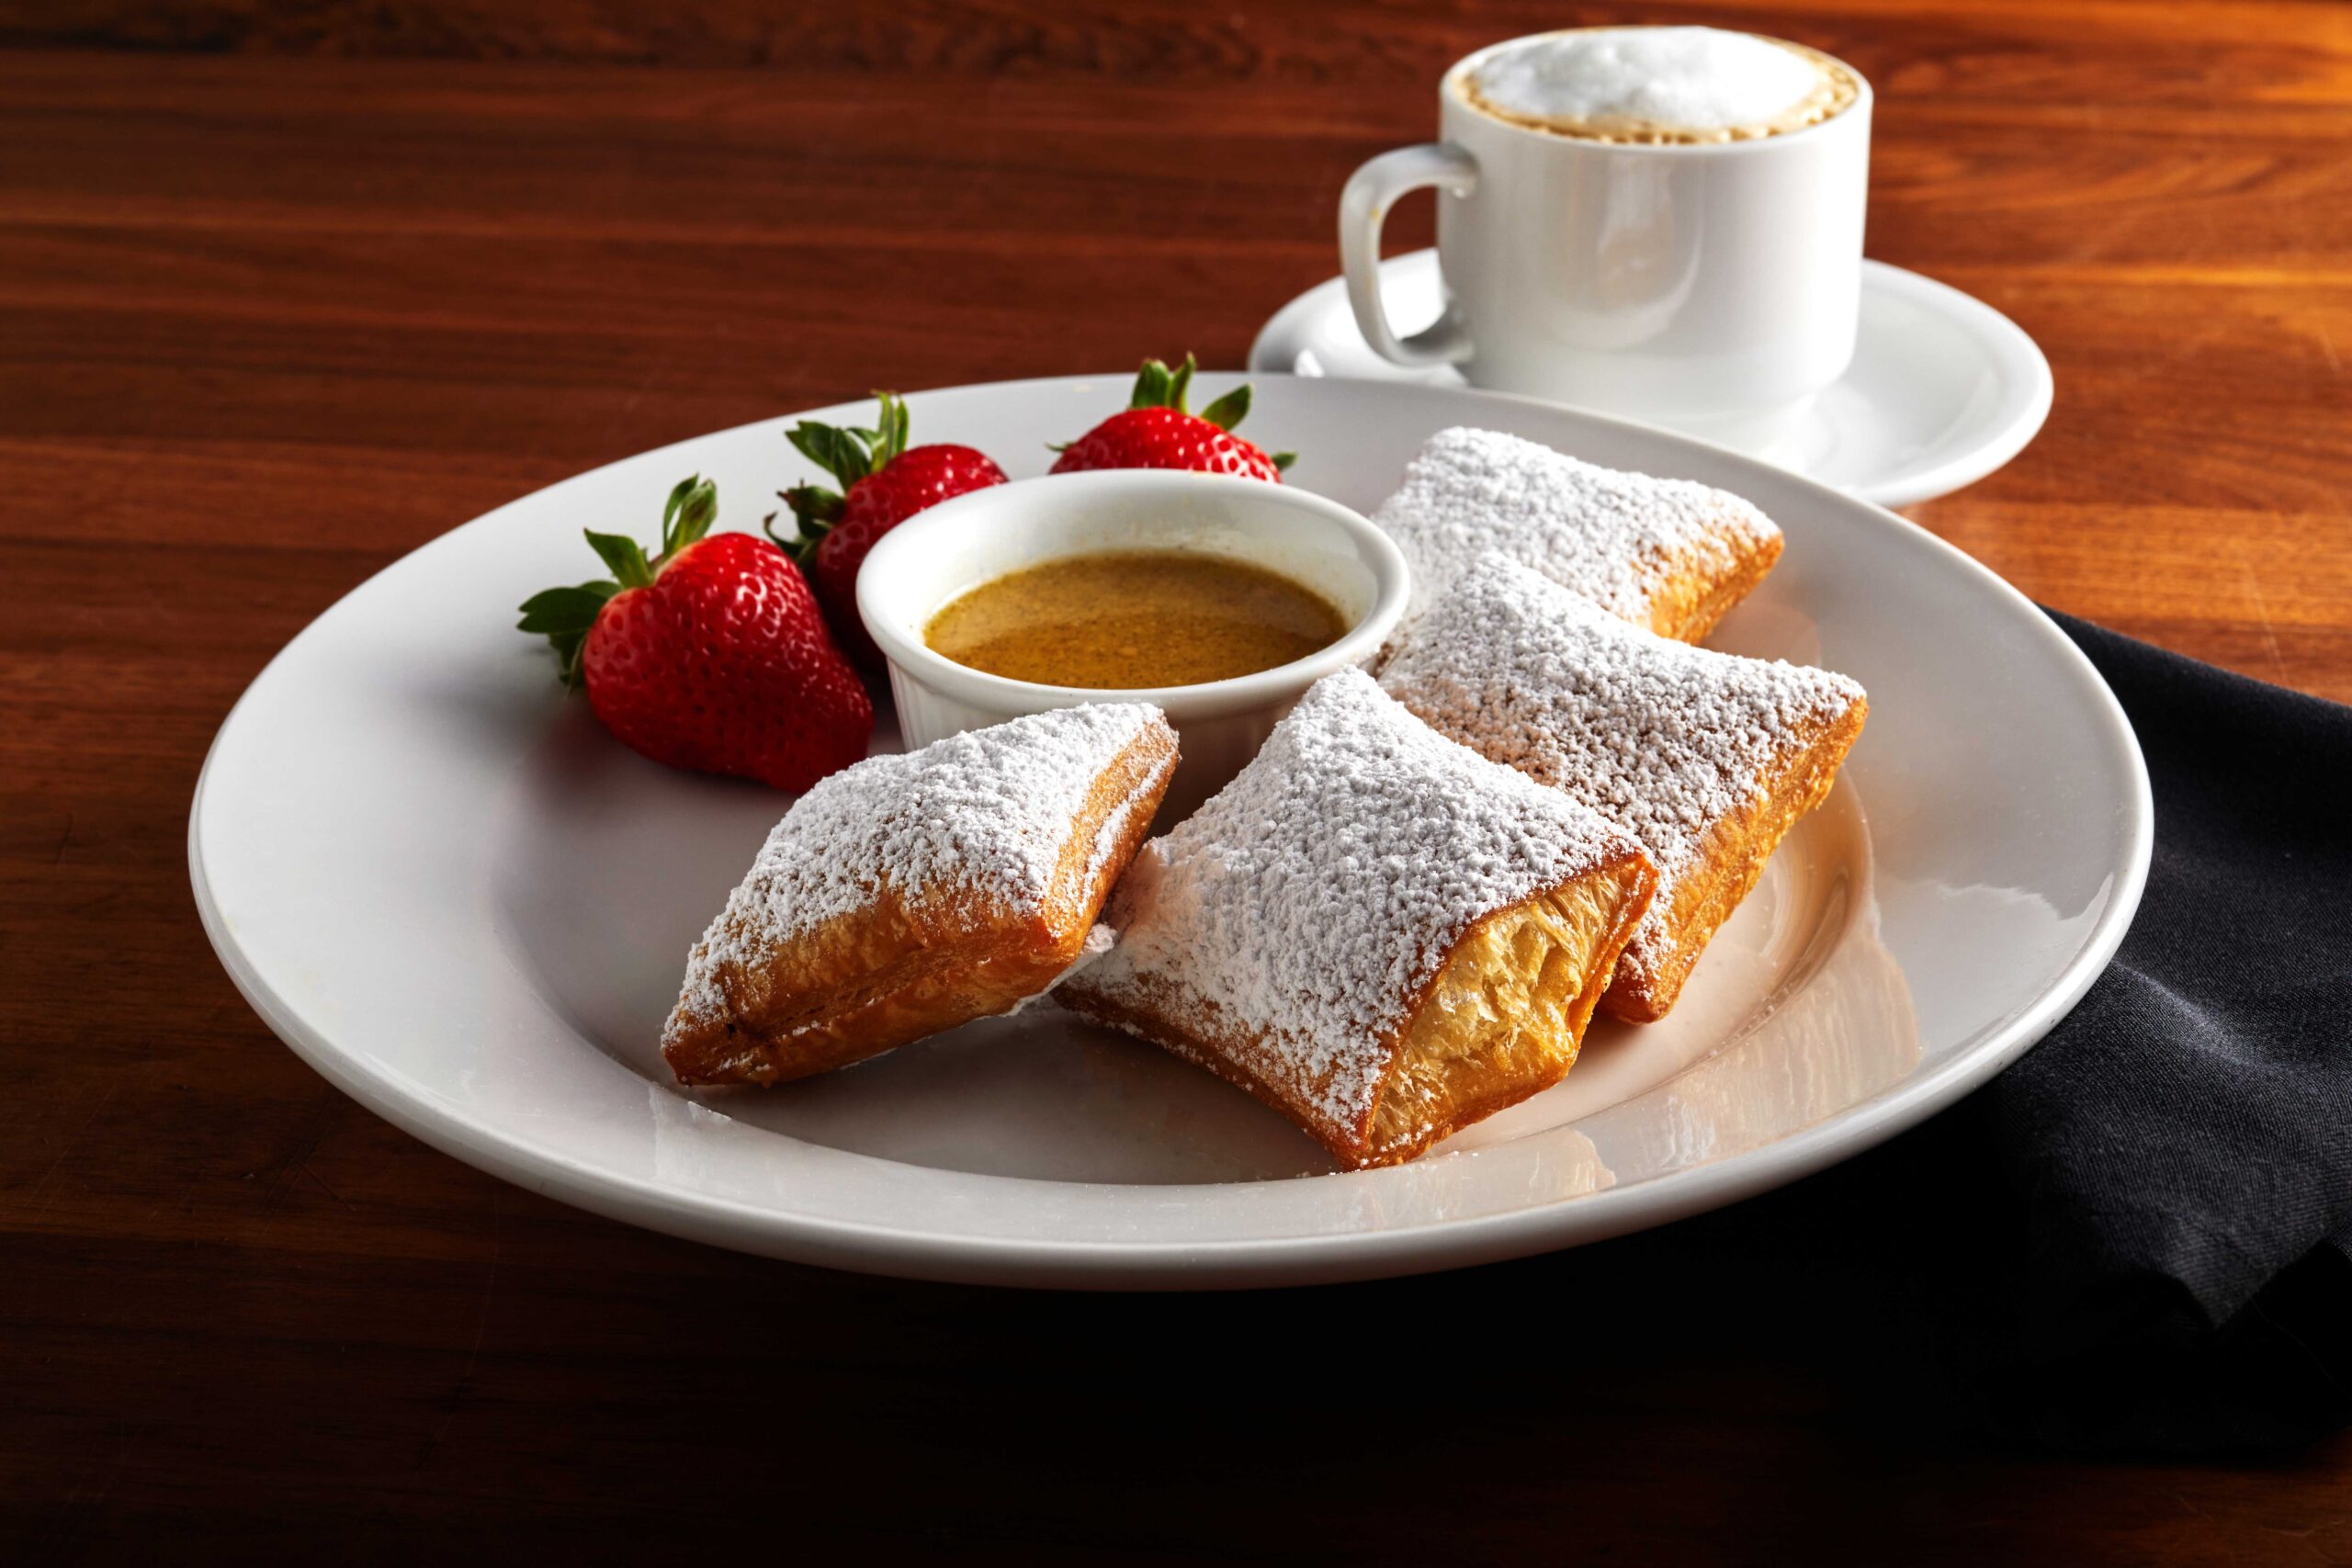 Beignets and strawberries